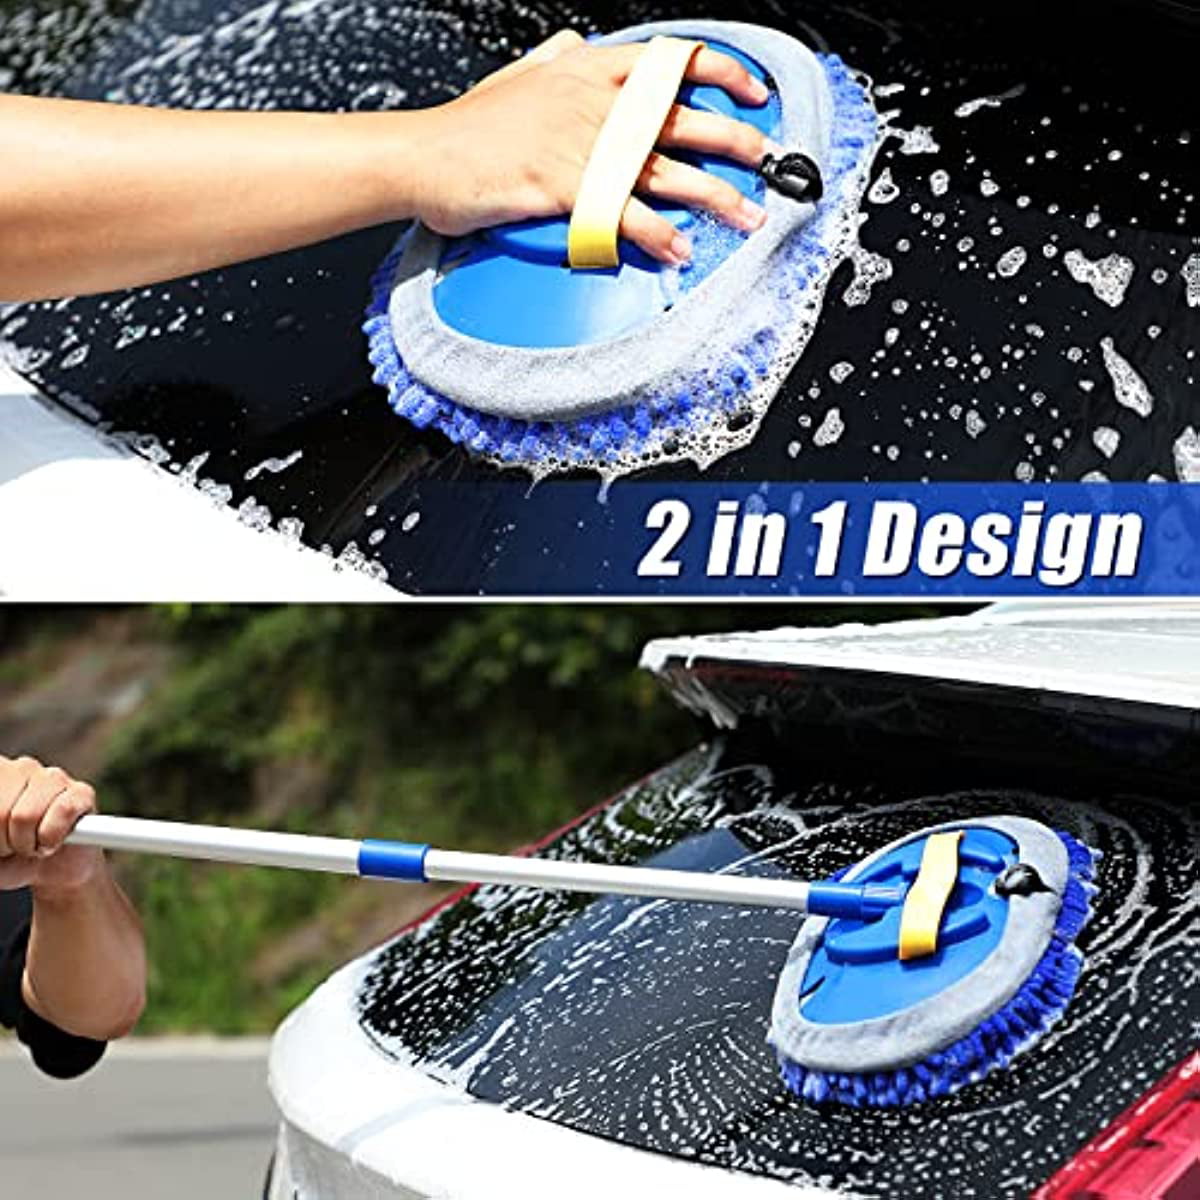 Car Wash Brush Kit with 41" Long Handle,5 in 1 Car Cleaning Mop,Microfiber Car Wash Brush,Glass Scrubber Vehicle Cleaner Kit,Blue